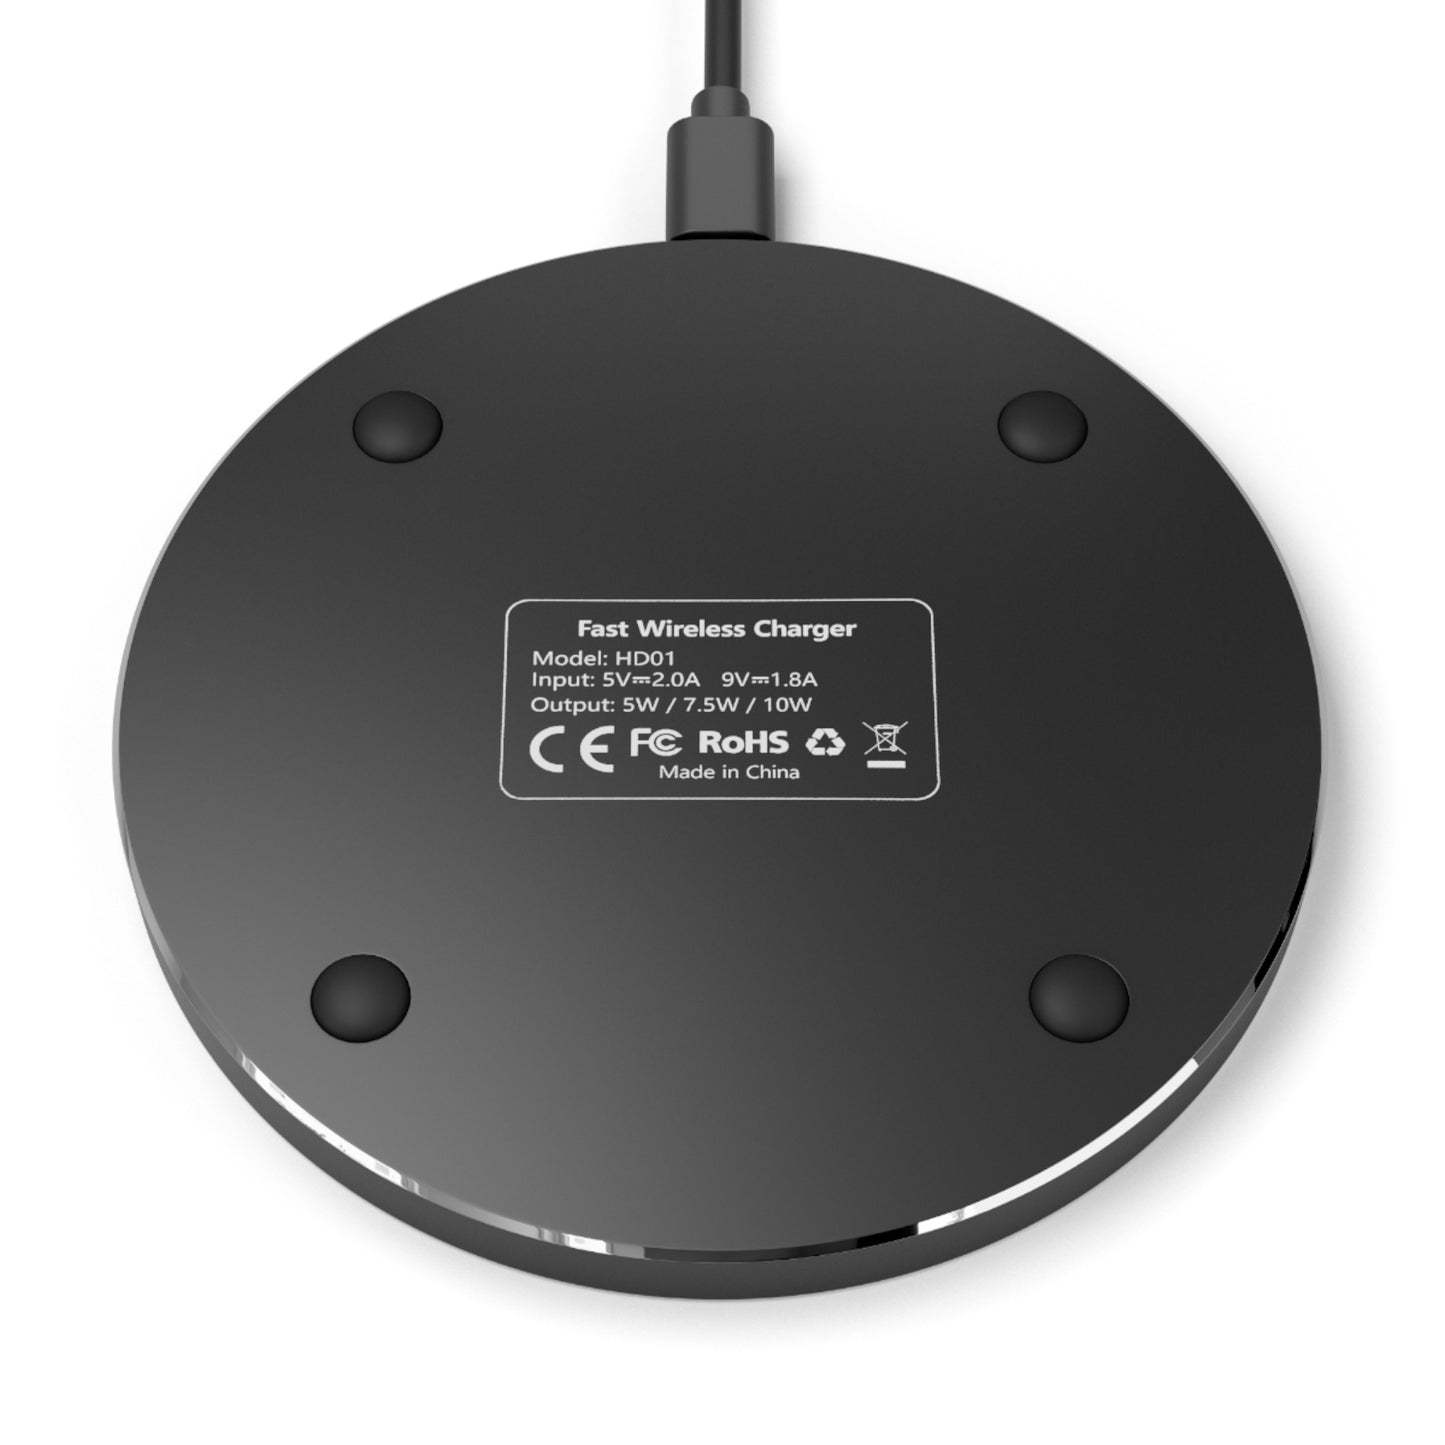 H Paris Wireless Charger